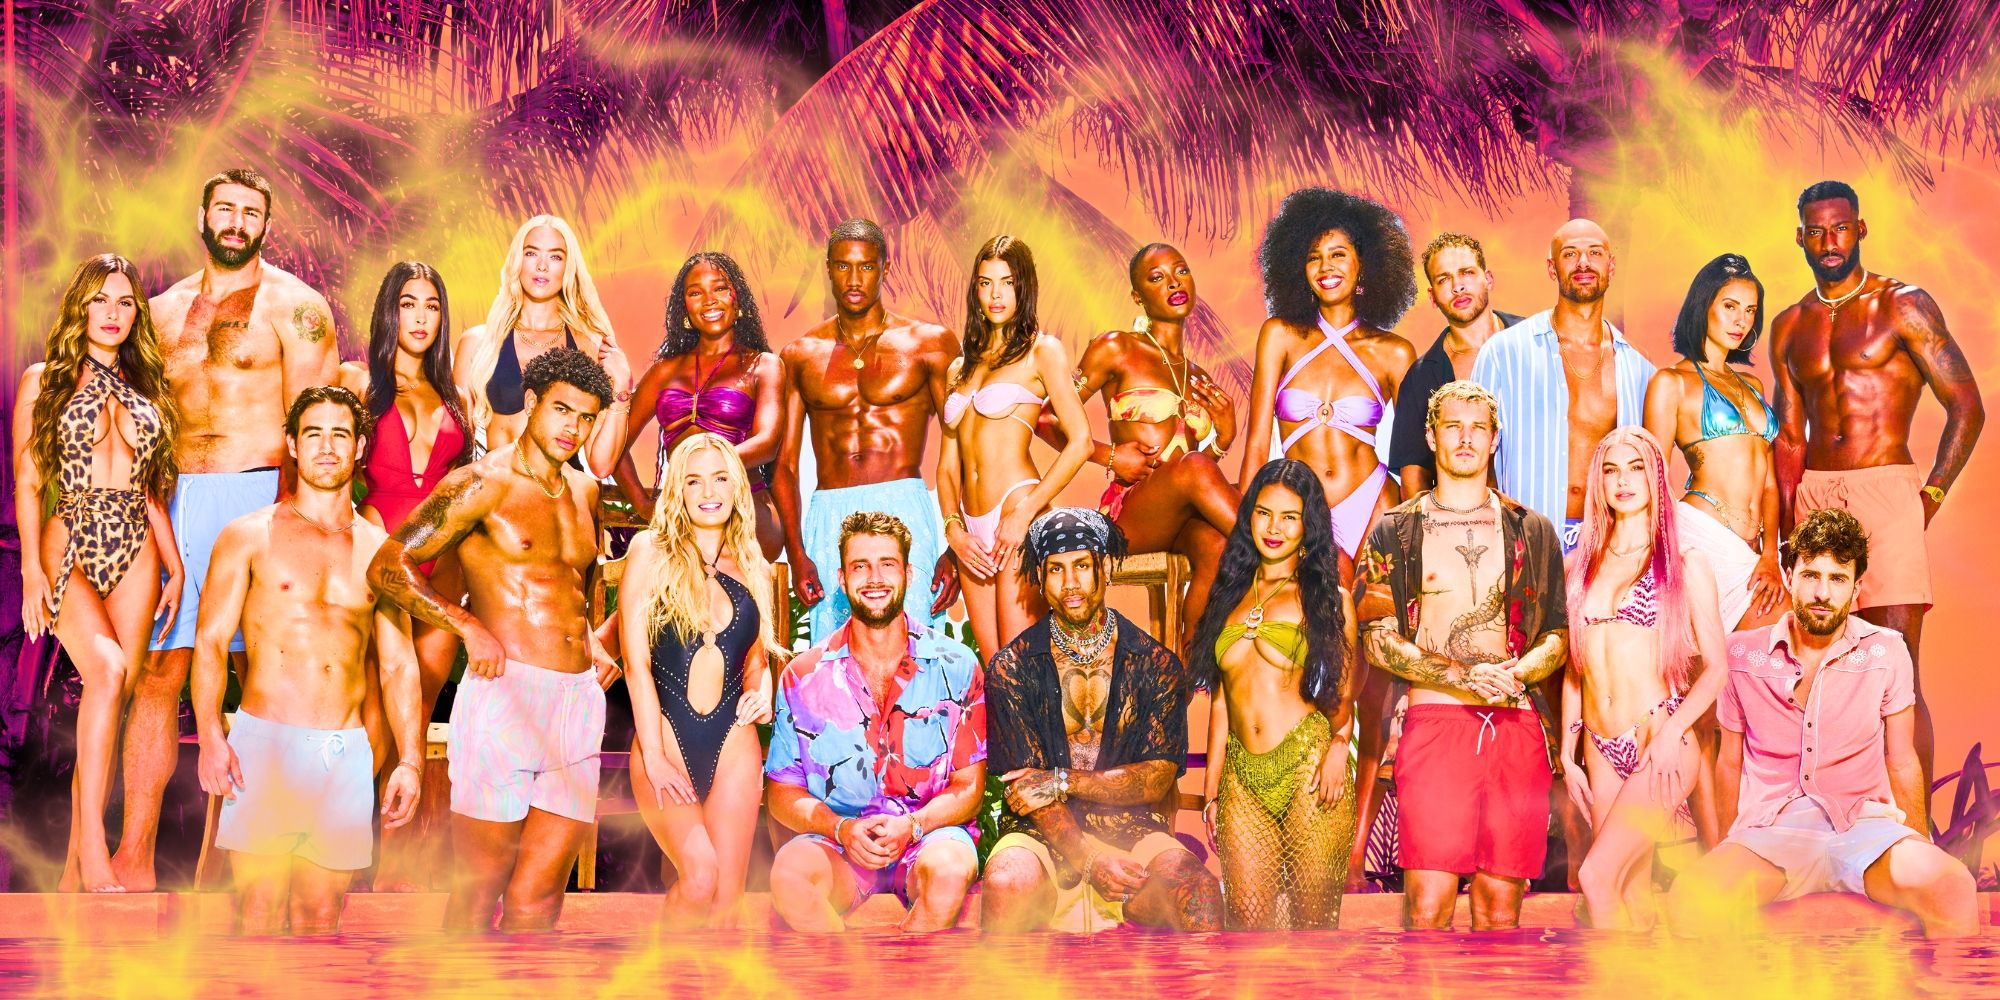 The Perfect Match Season 2 cast wears swimsuits.